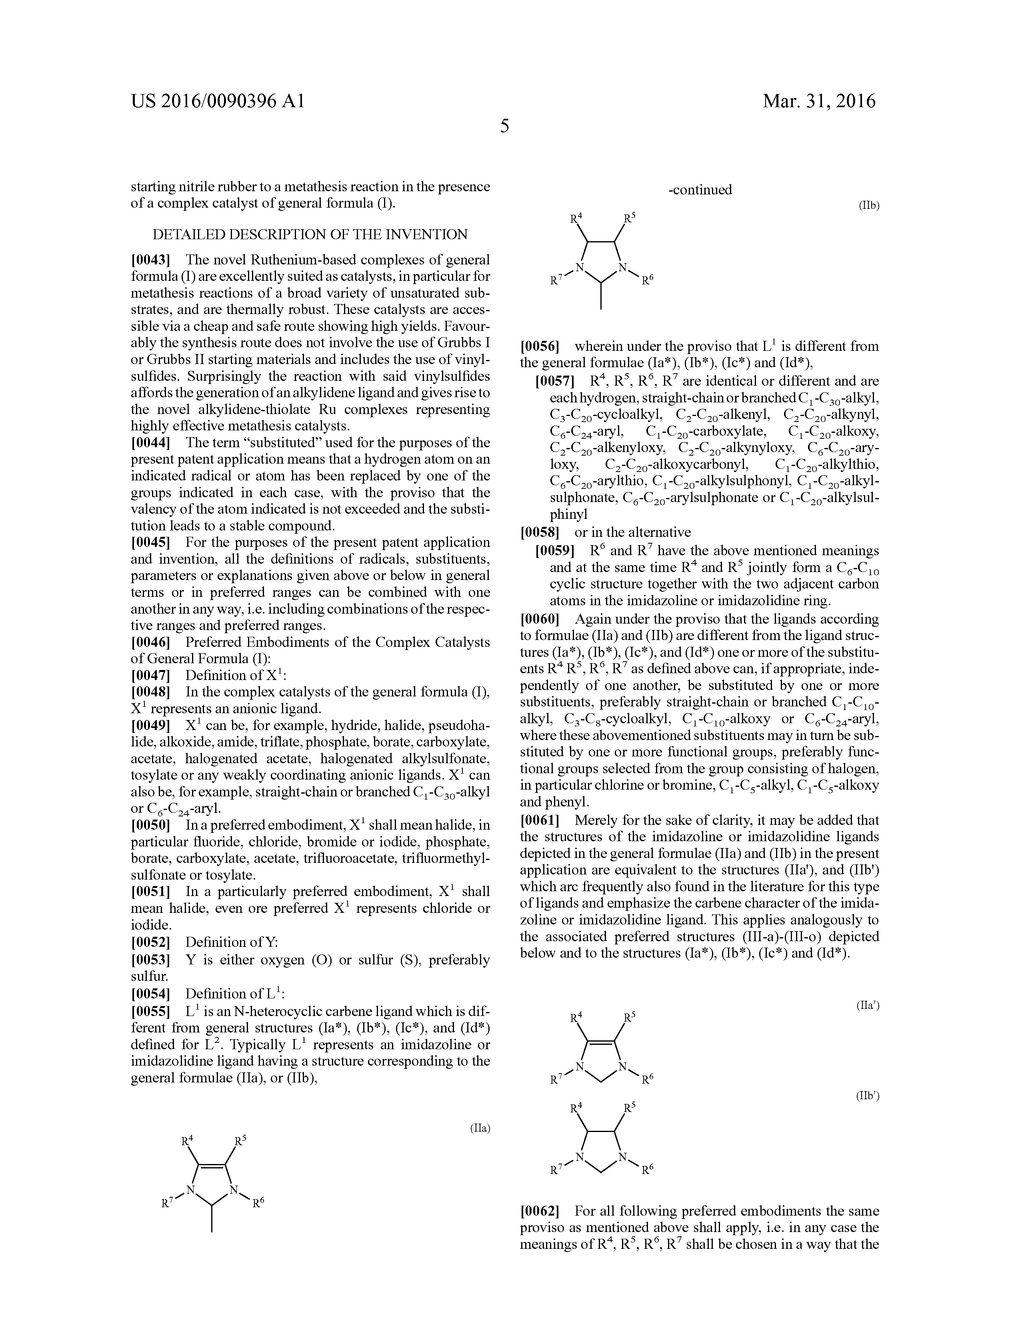 RUTHENIUM-BASED COMPLEXES, THEIR PREPARATION AND USE AS CATALYSTS - diagram, schematic, and image 06